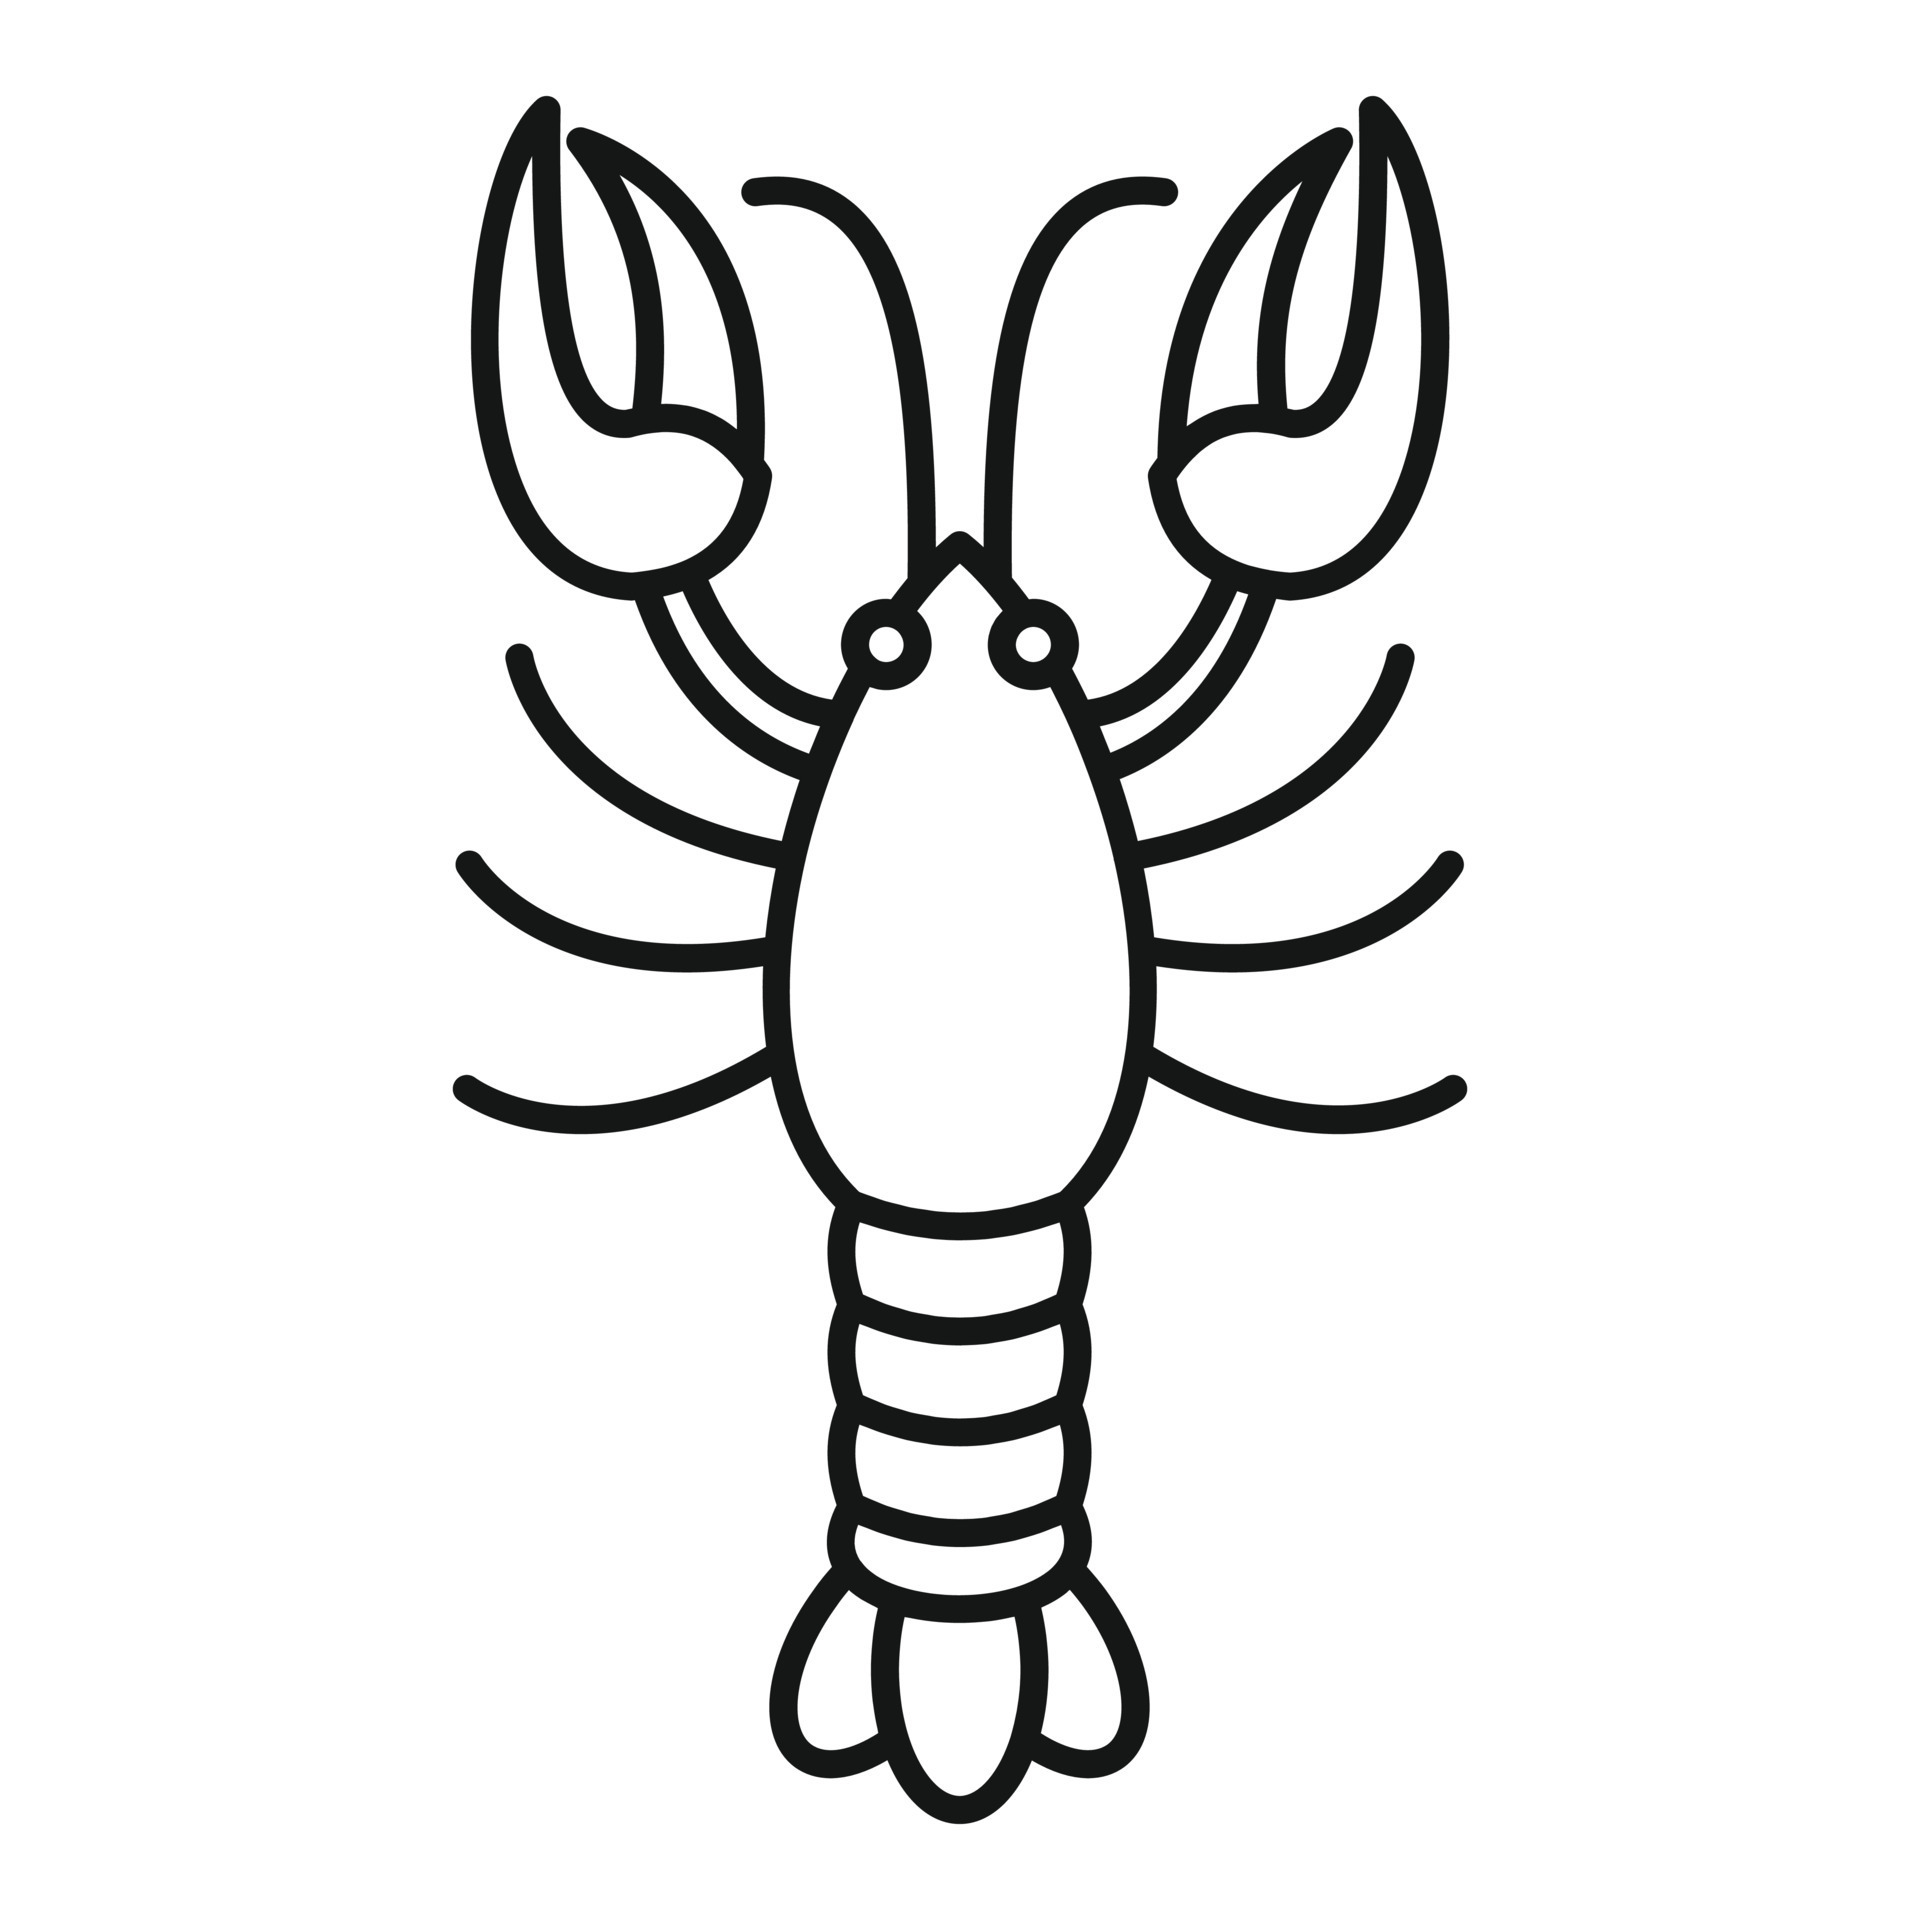 How to Draw a Lobster  Easy Drawing Art